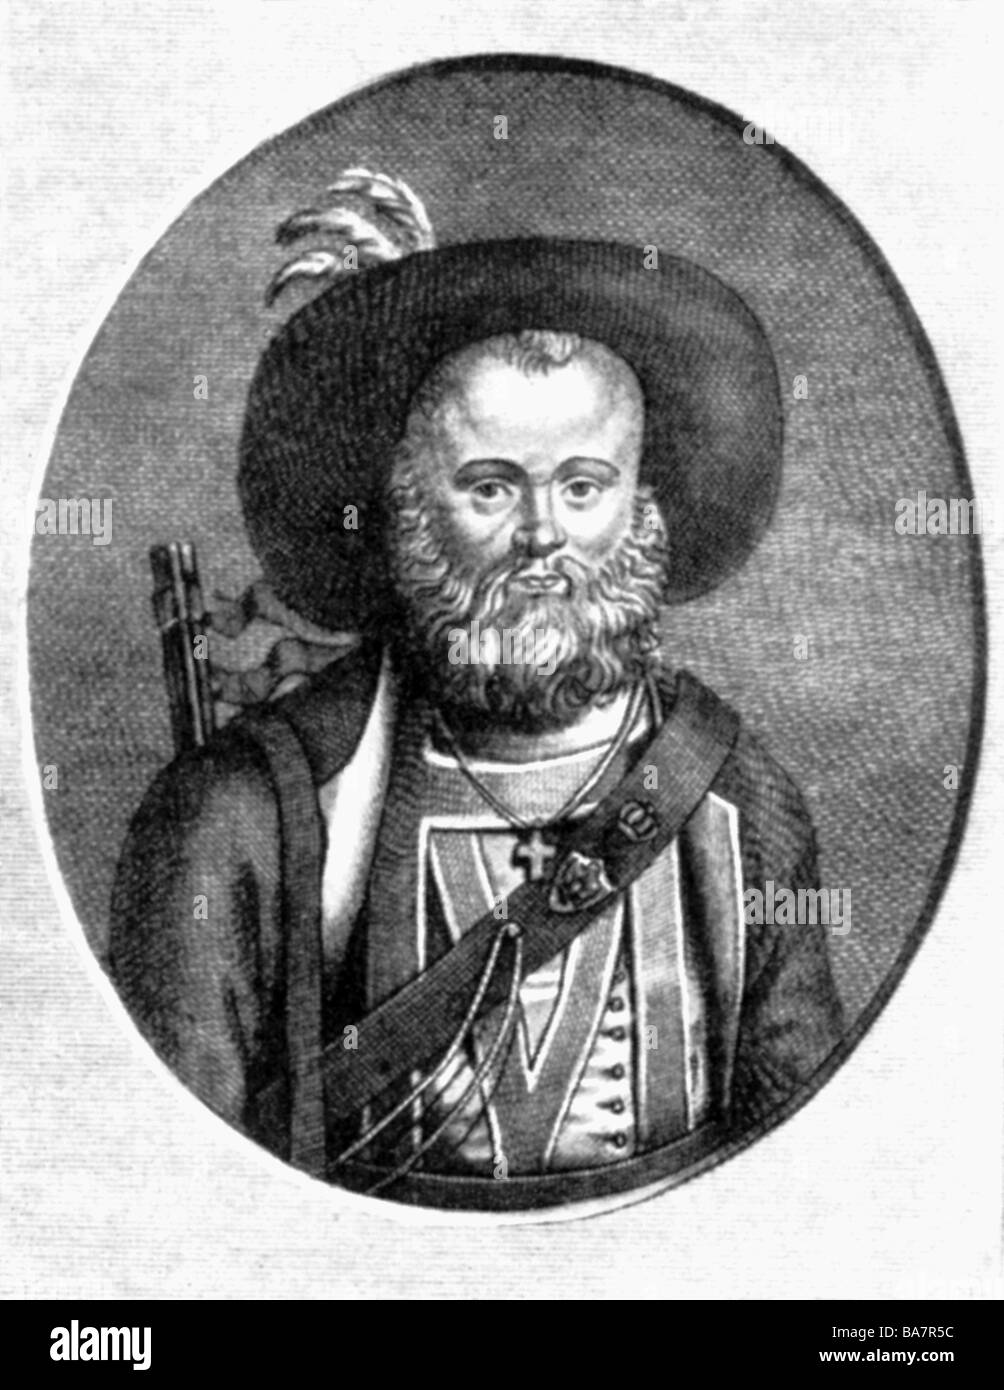 Hofer, Andreas, 22.11.1767 - 20.2.1810, Tyrolian freedom fighter, portrait, wood engraving, 19th century, , Stock Photo